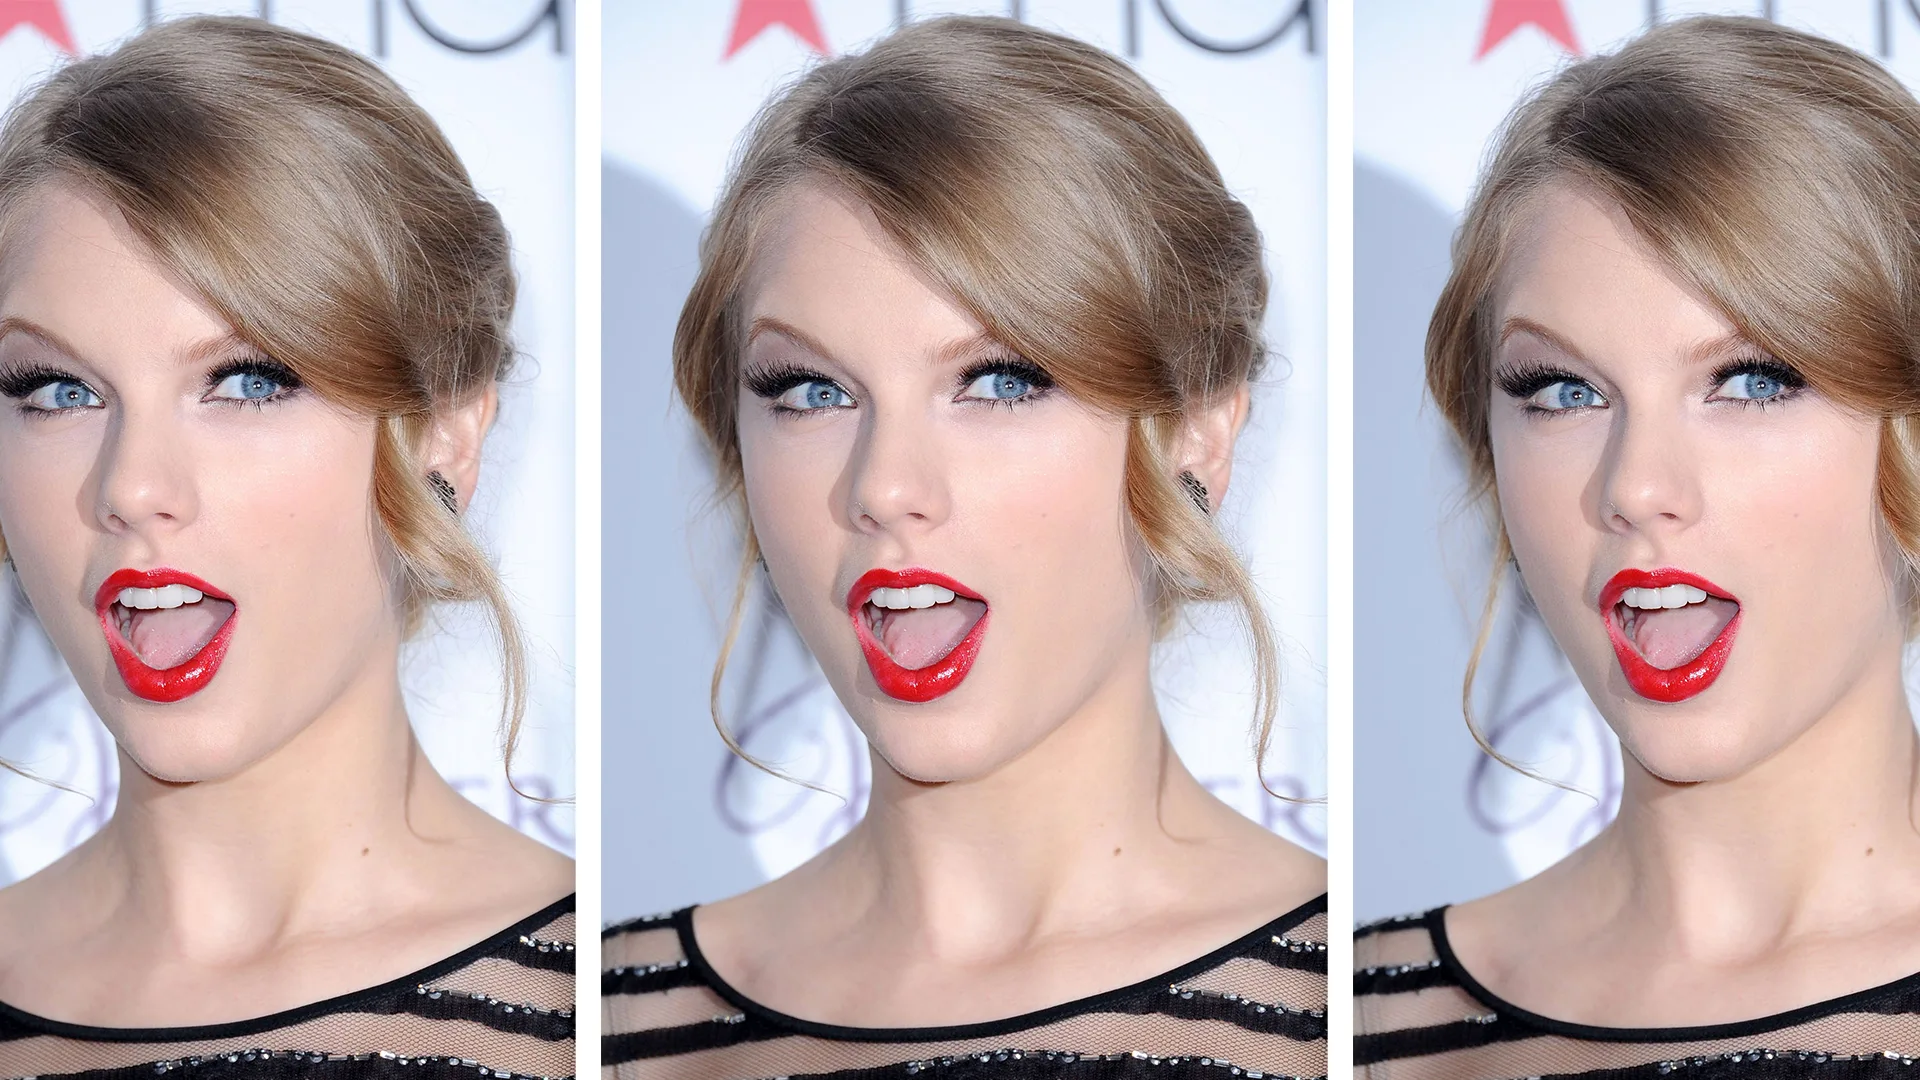 Taylor Swift pulling shocked face, the photo is repeated 3 times